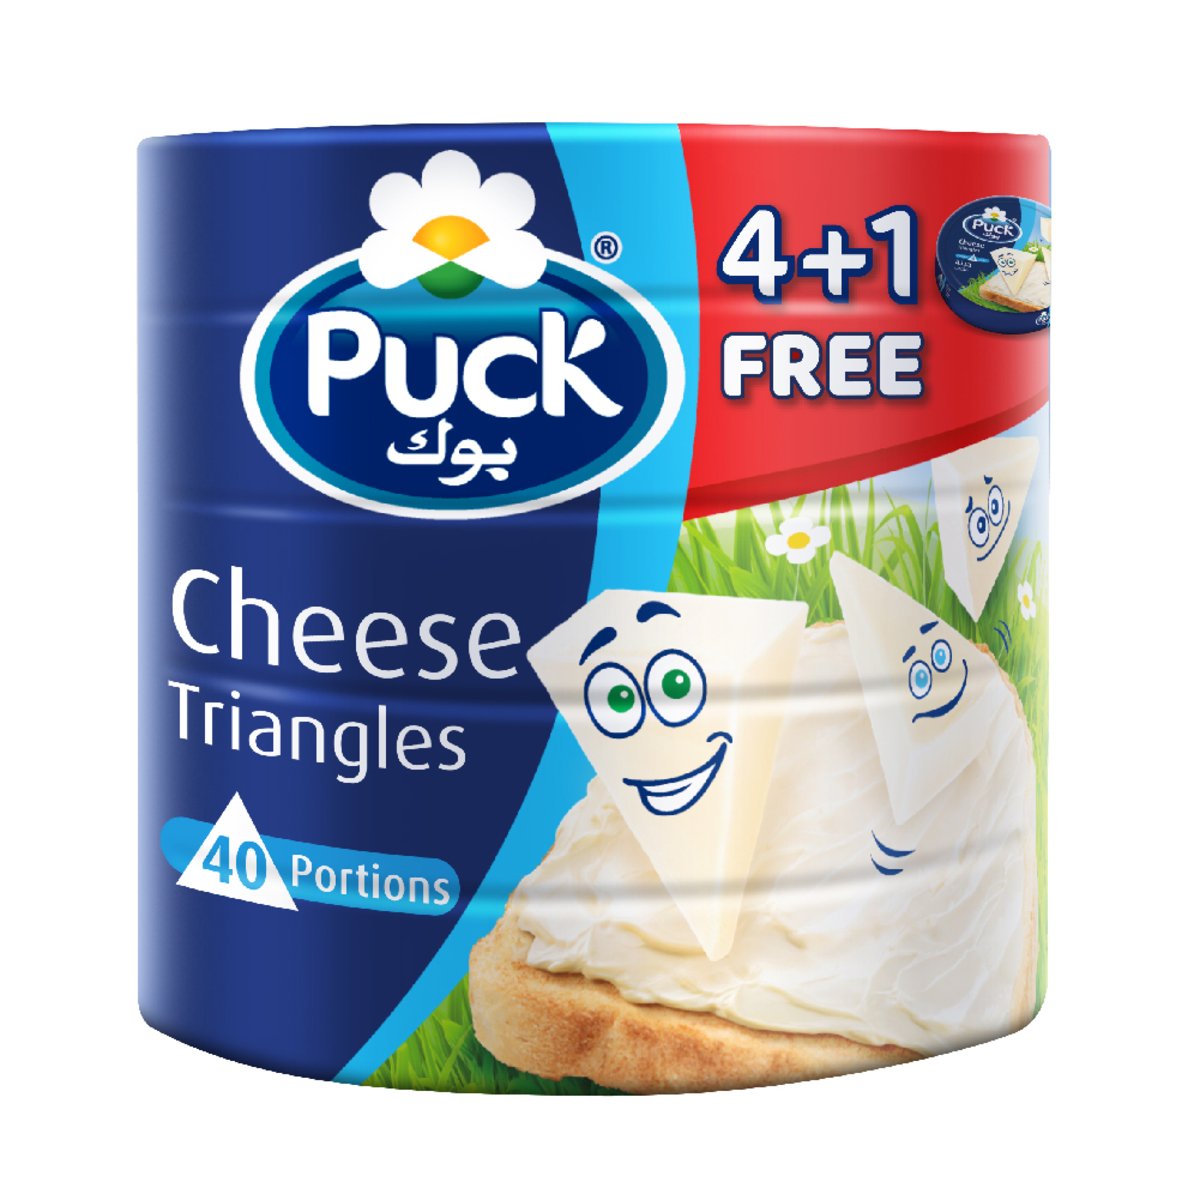 Puck Cheese Triangles 40 Portions Value Pack 5 x 120g